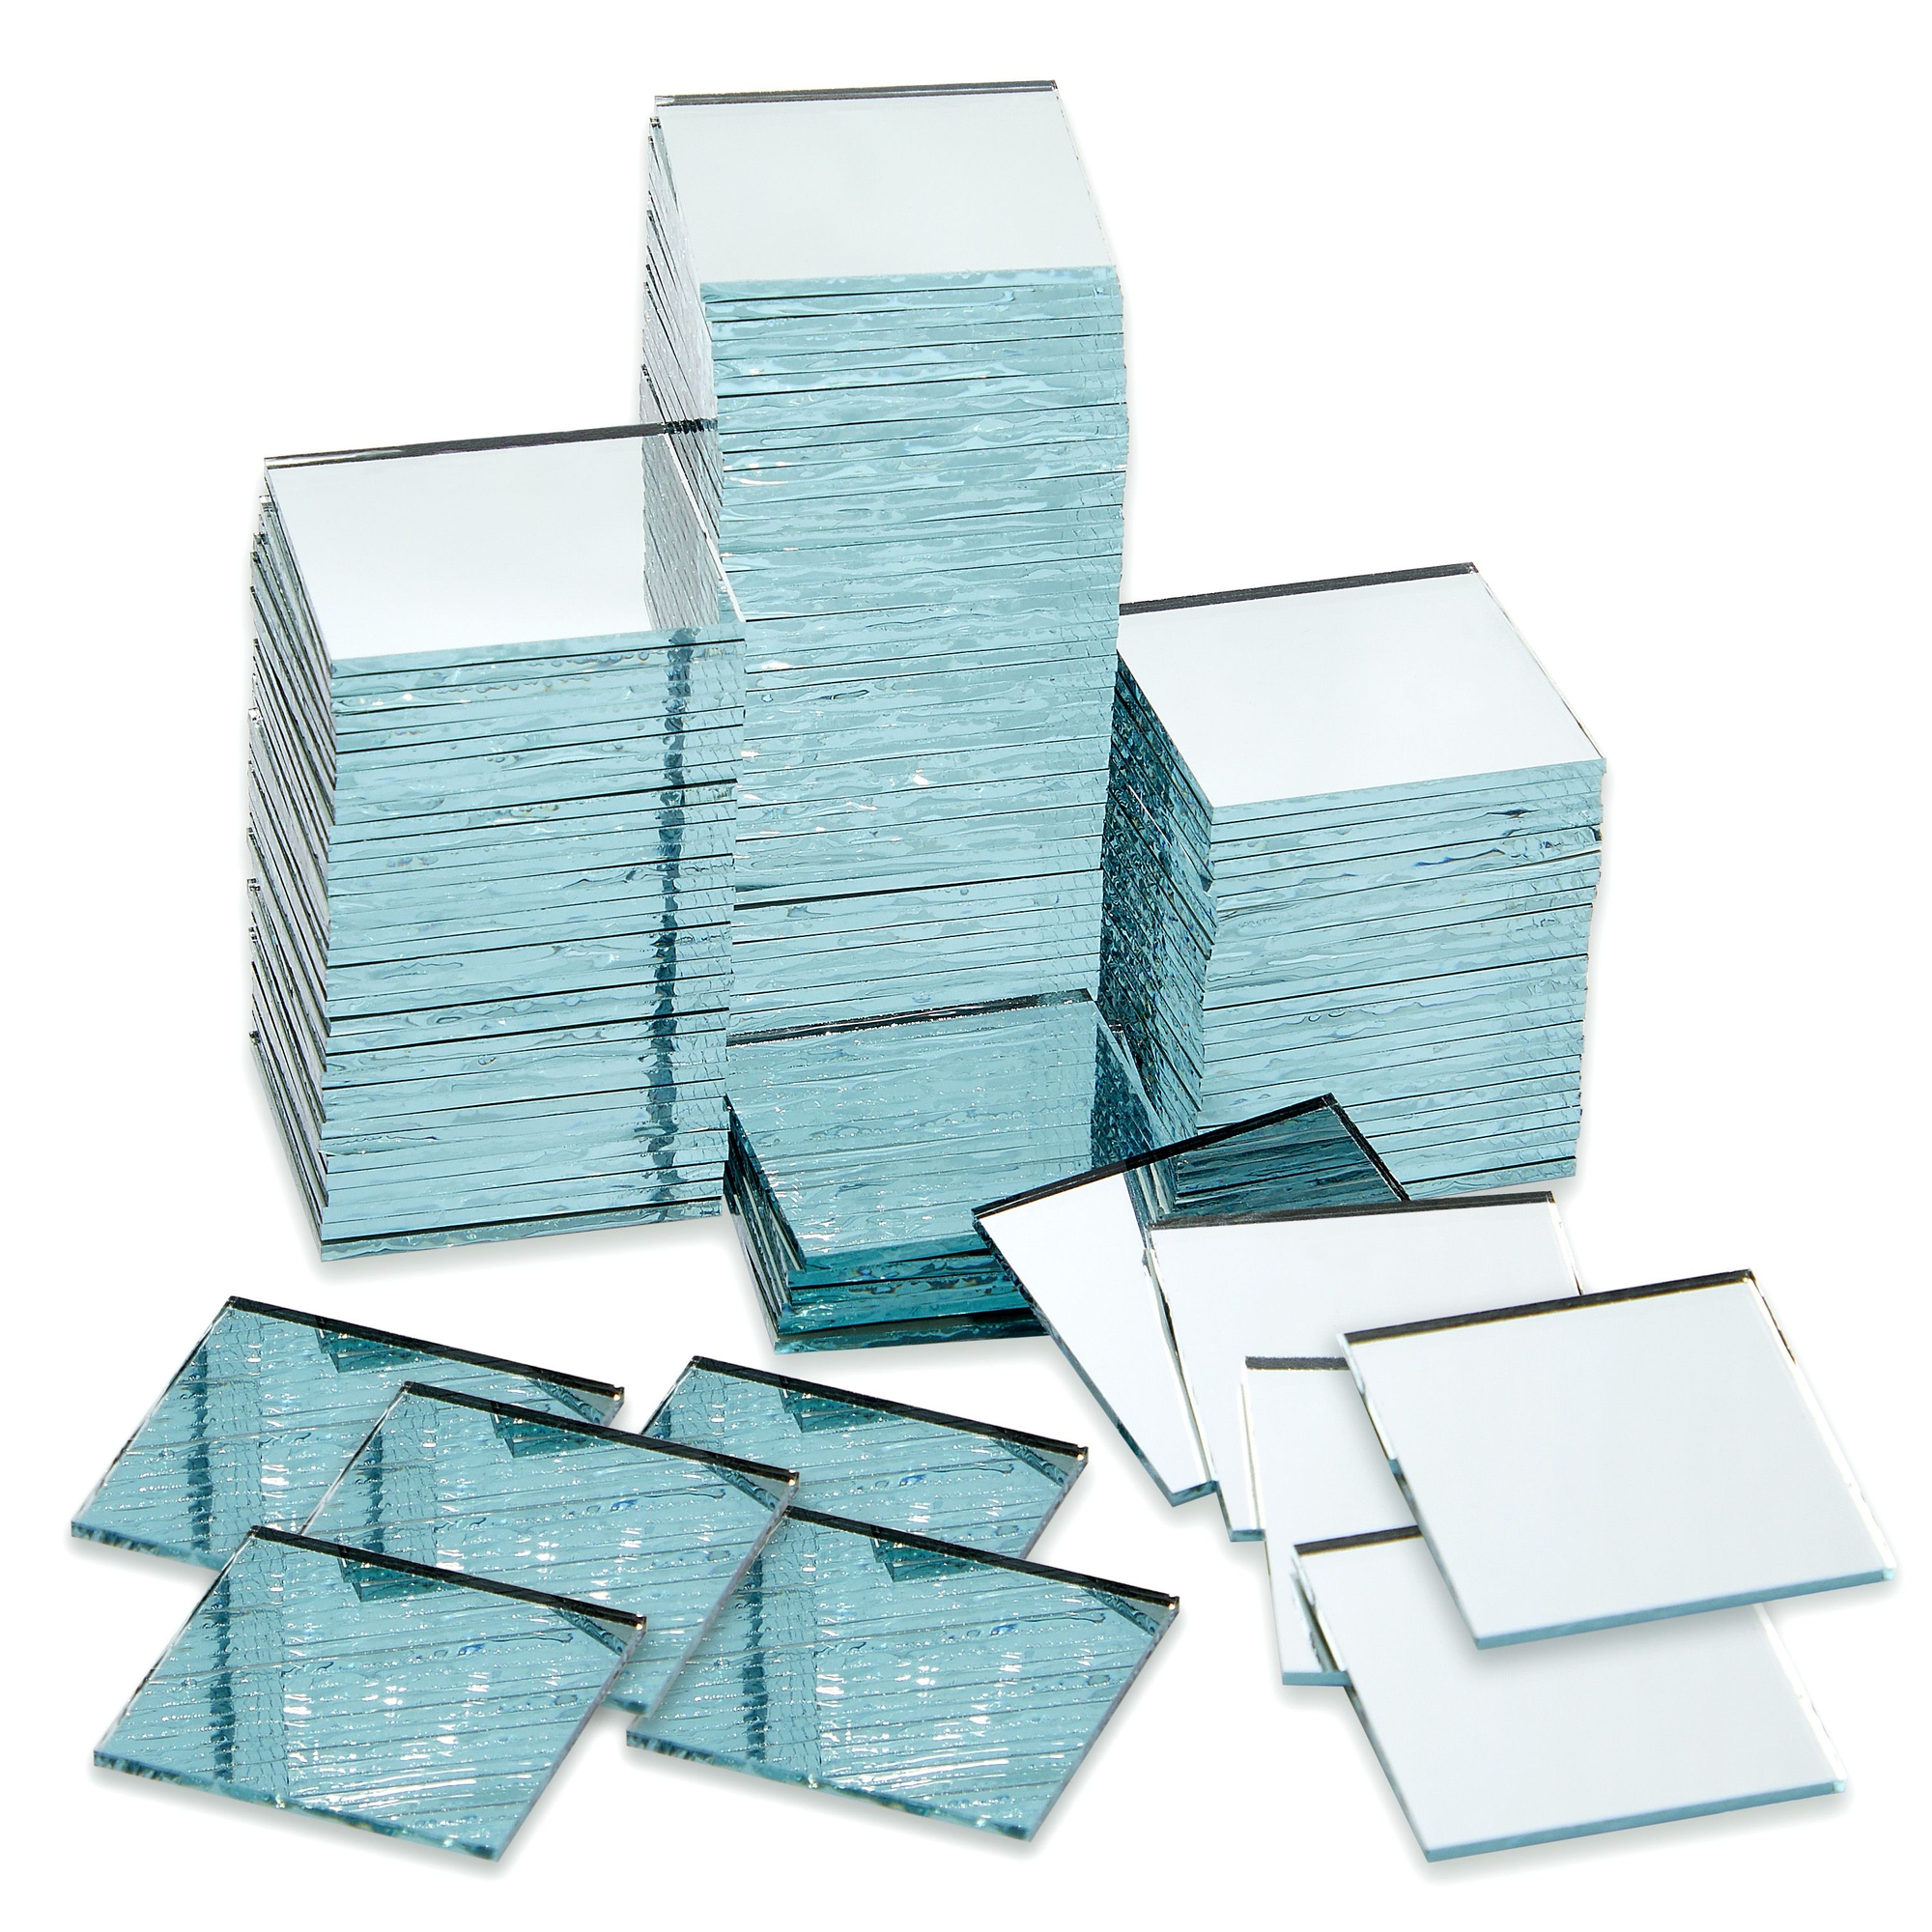 120 Pieces Mini Square 1 Inch Small Mirror Tiles for Crafts Supplies, Home  Wall Decor